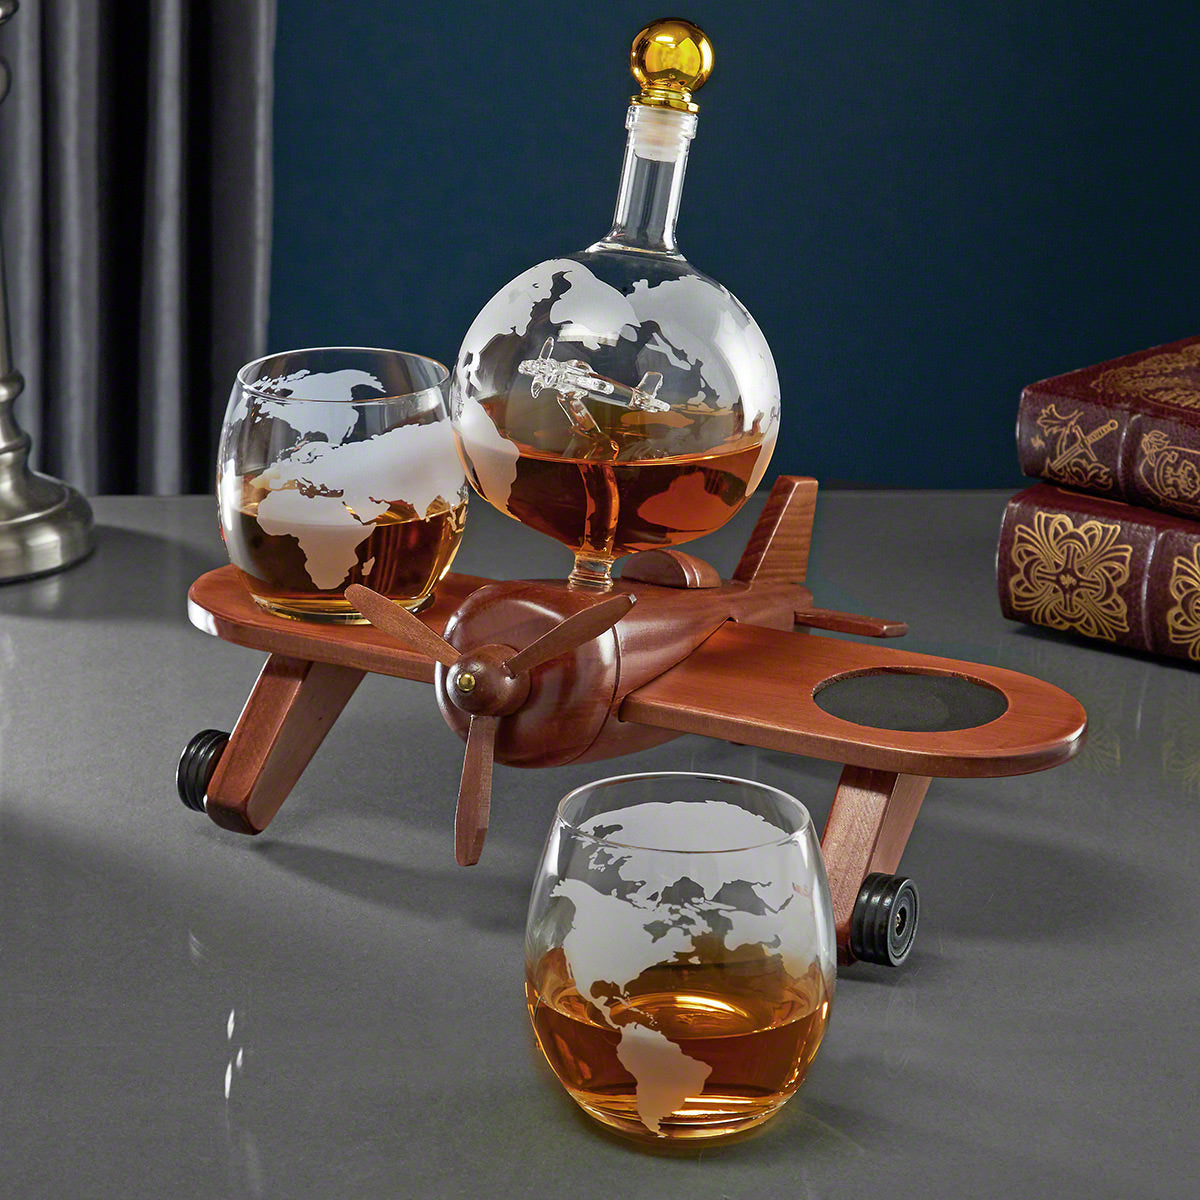 Airplane Whiskey Decanter Set with Globe Glasses